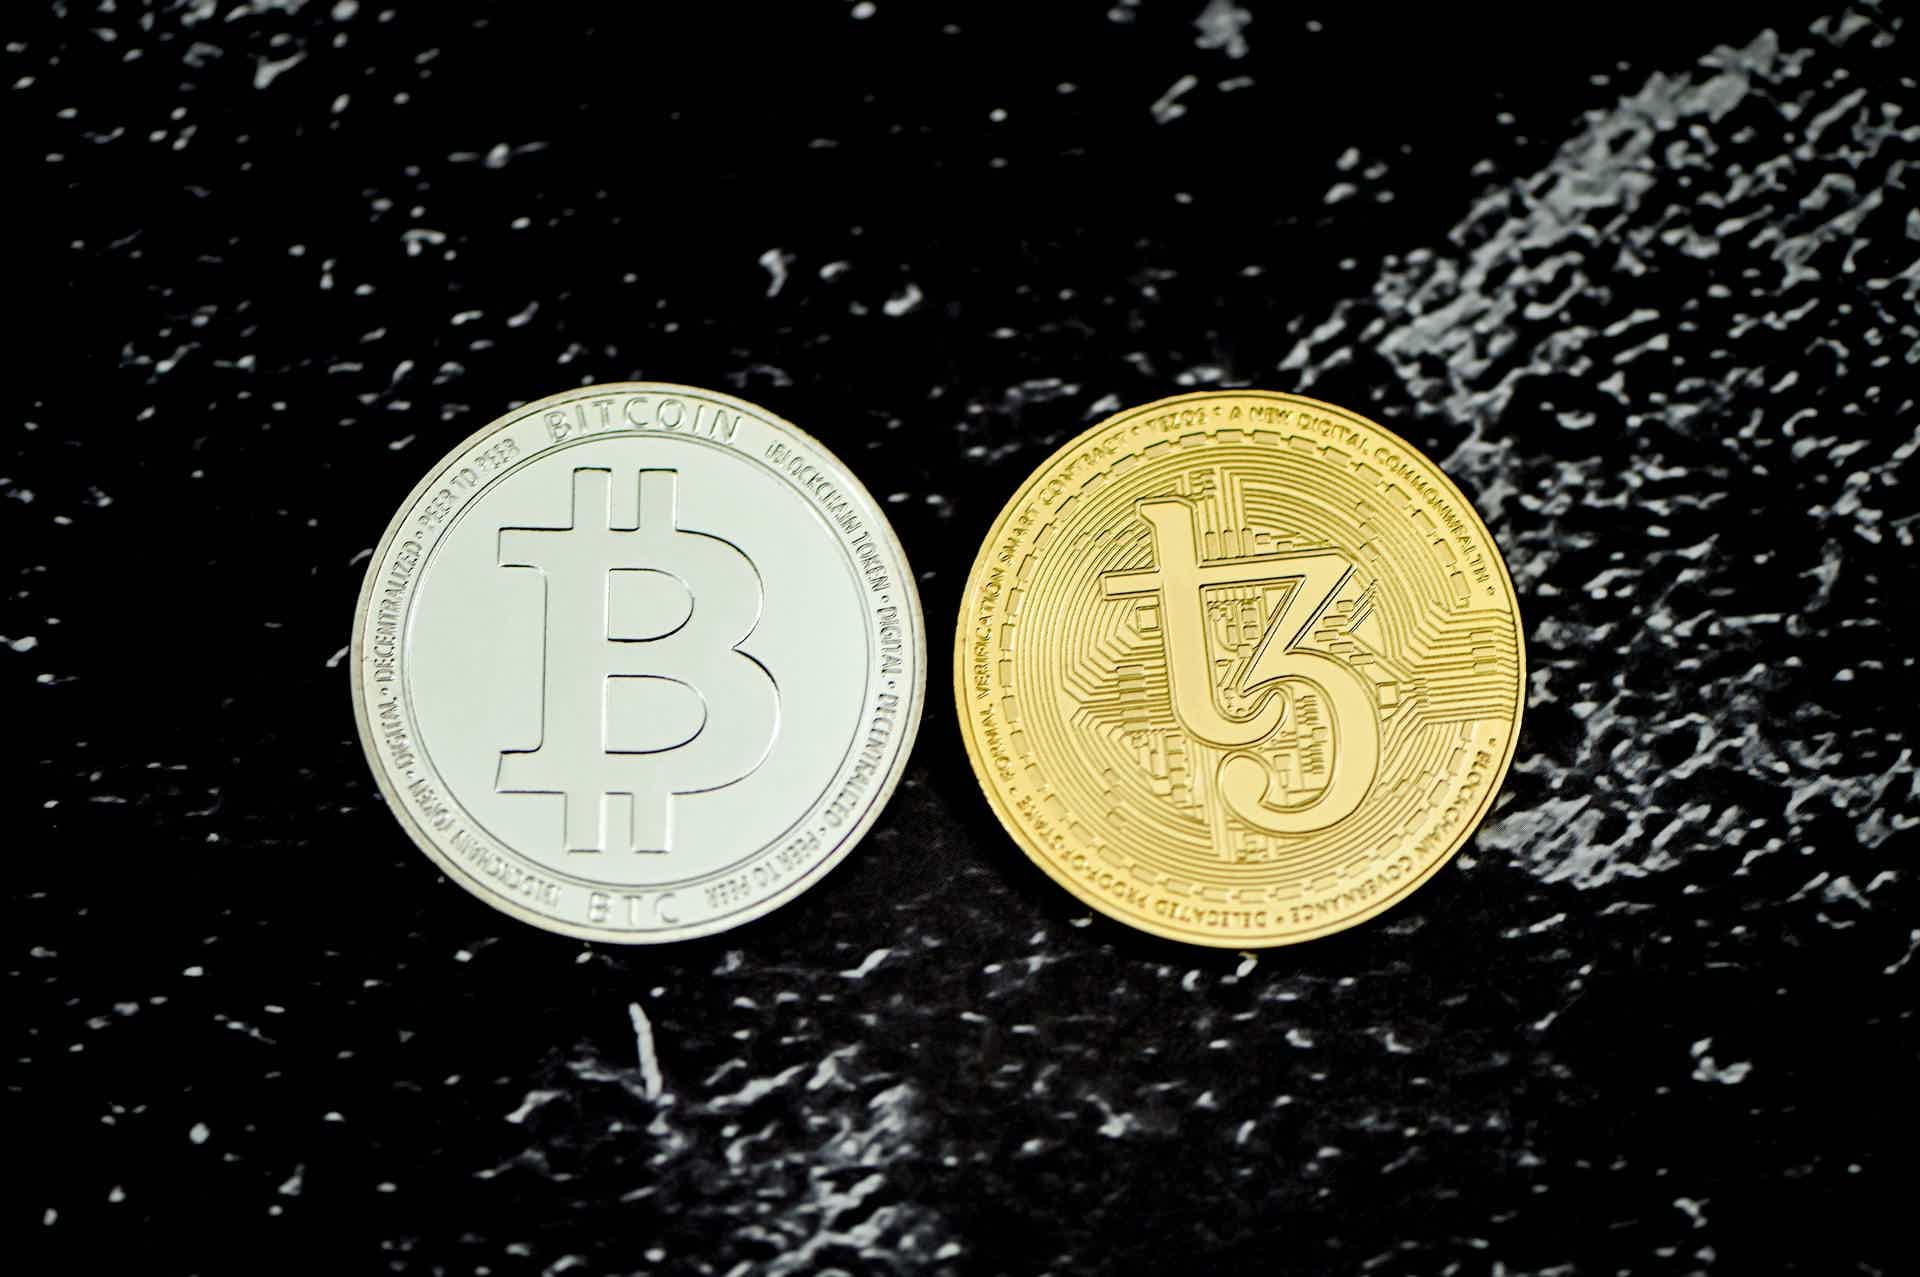 two physical representations of cryptocoins